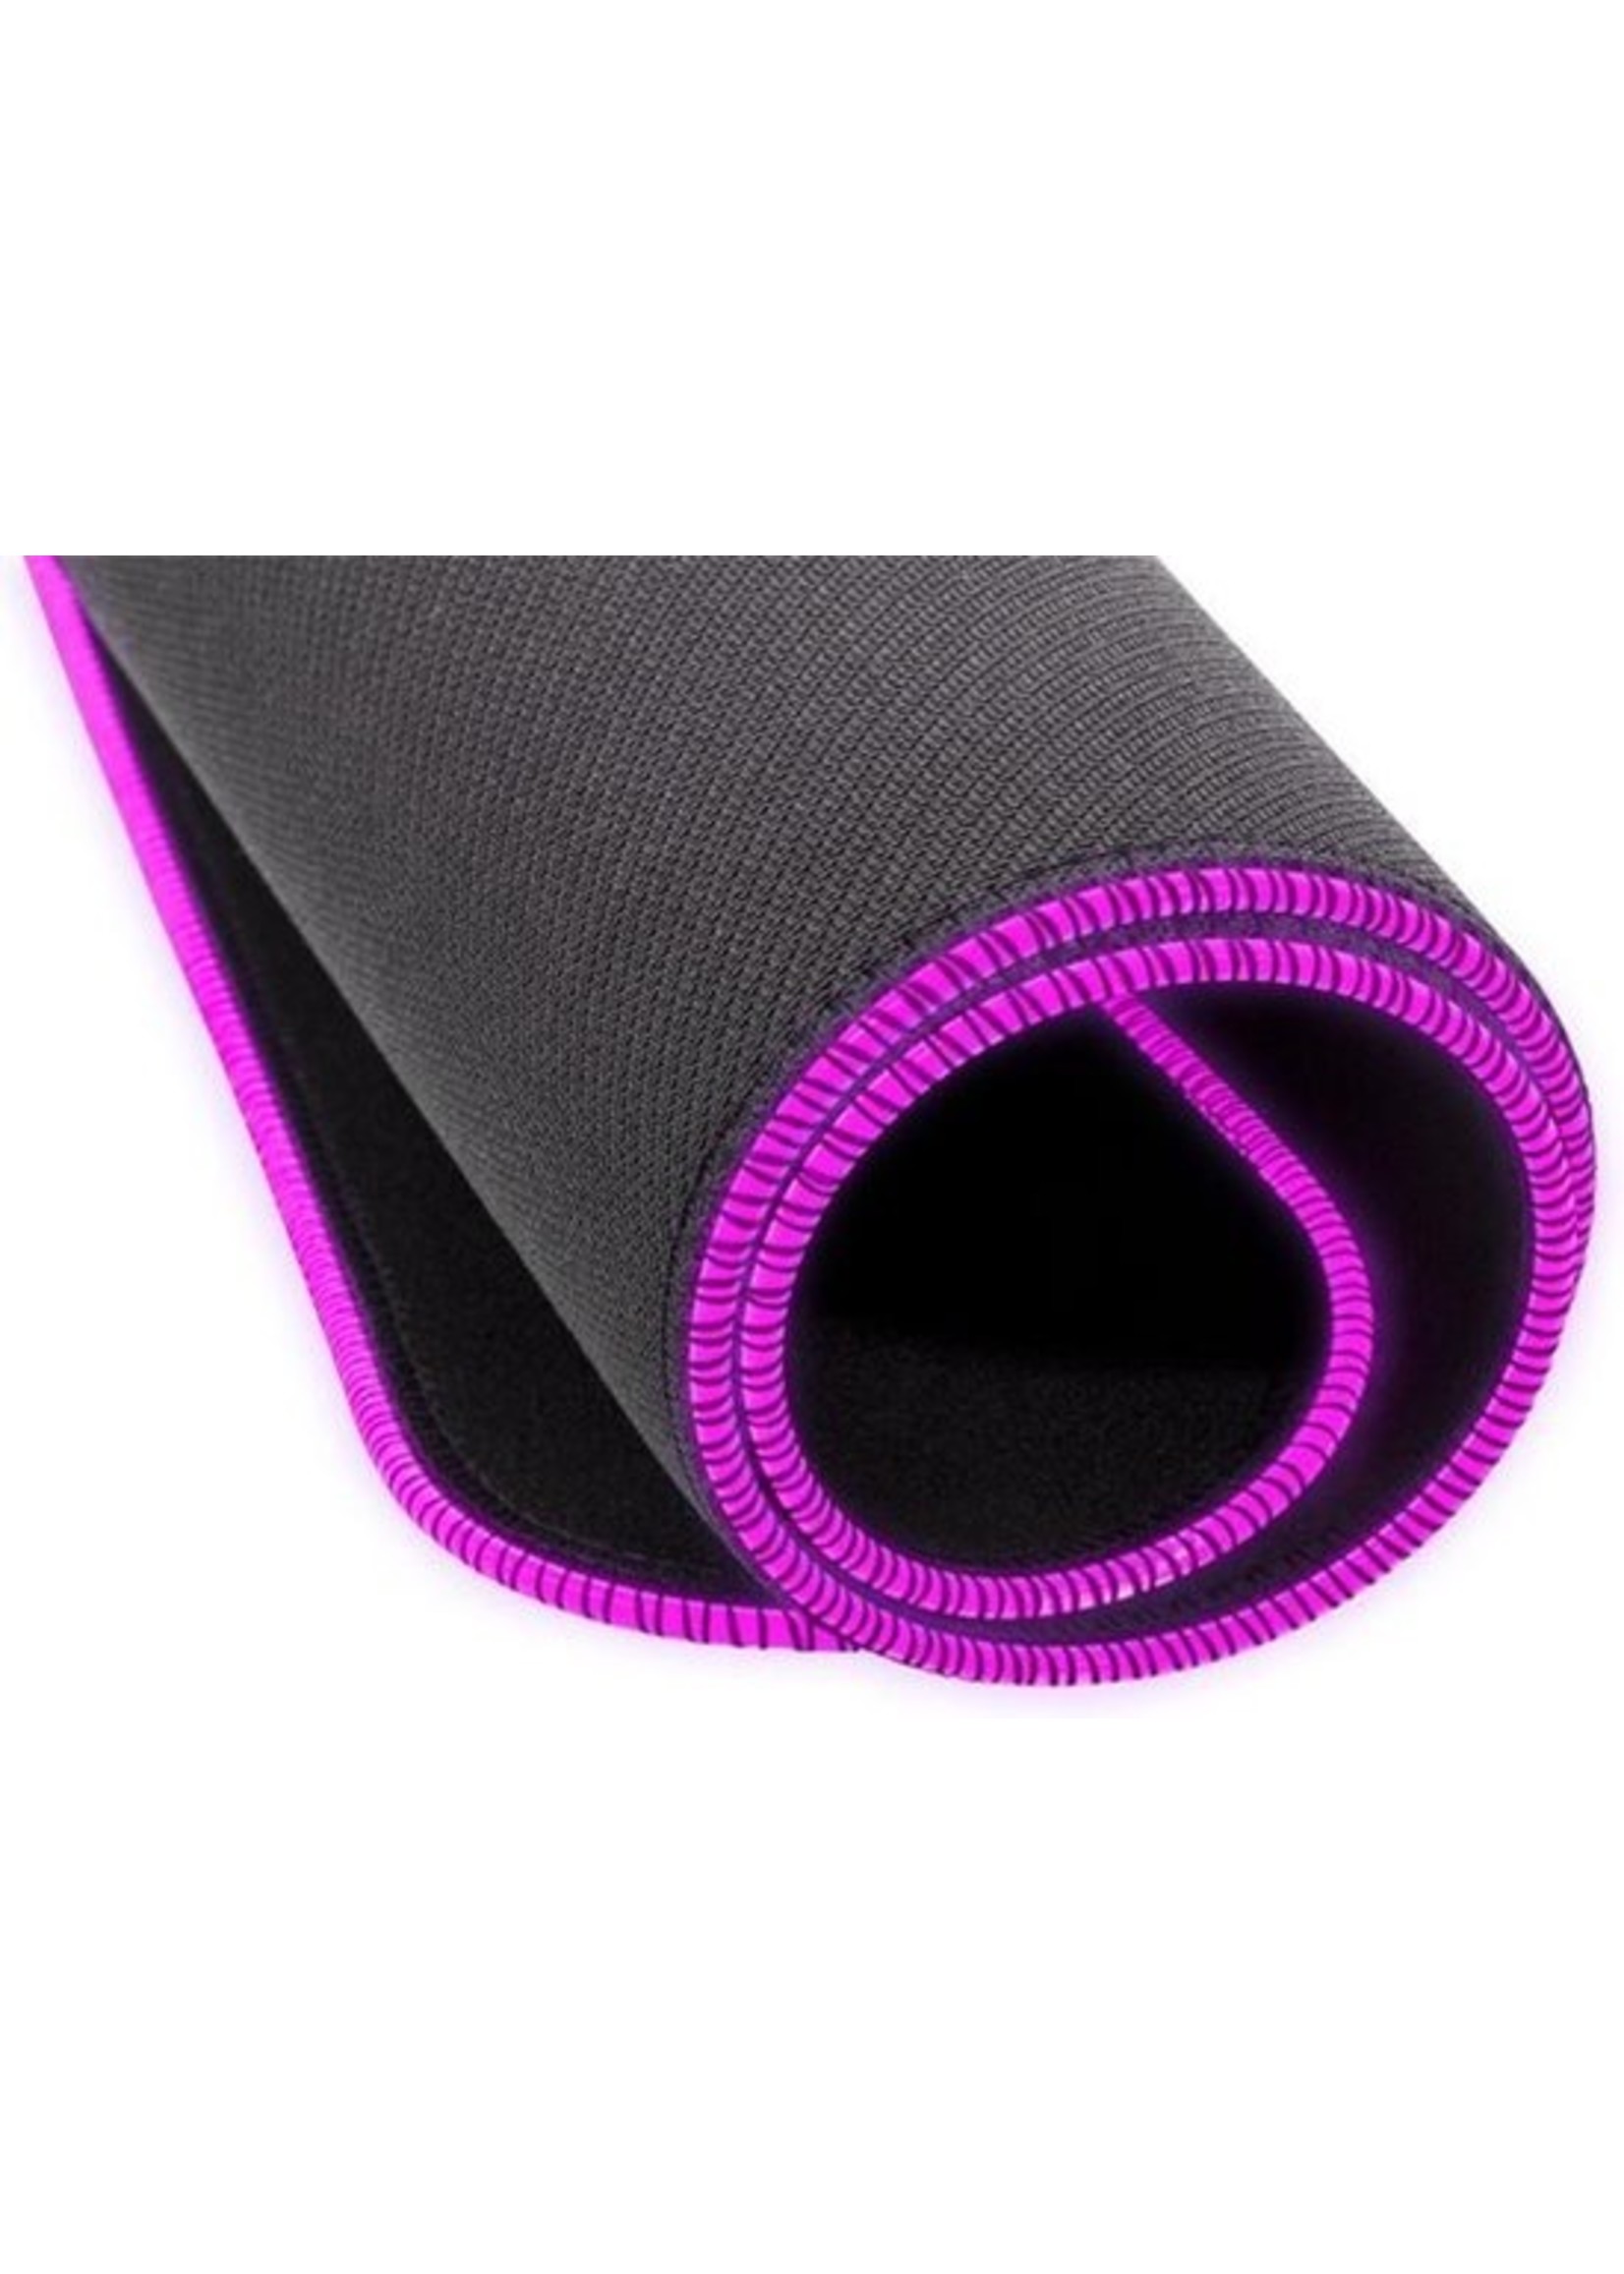 Coolermaster Cooler Master MP750 Soft RGB Gaming Mouse Pad - Large - 47cm x 35cm